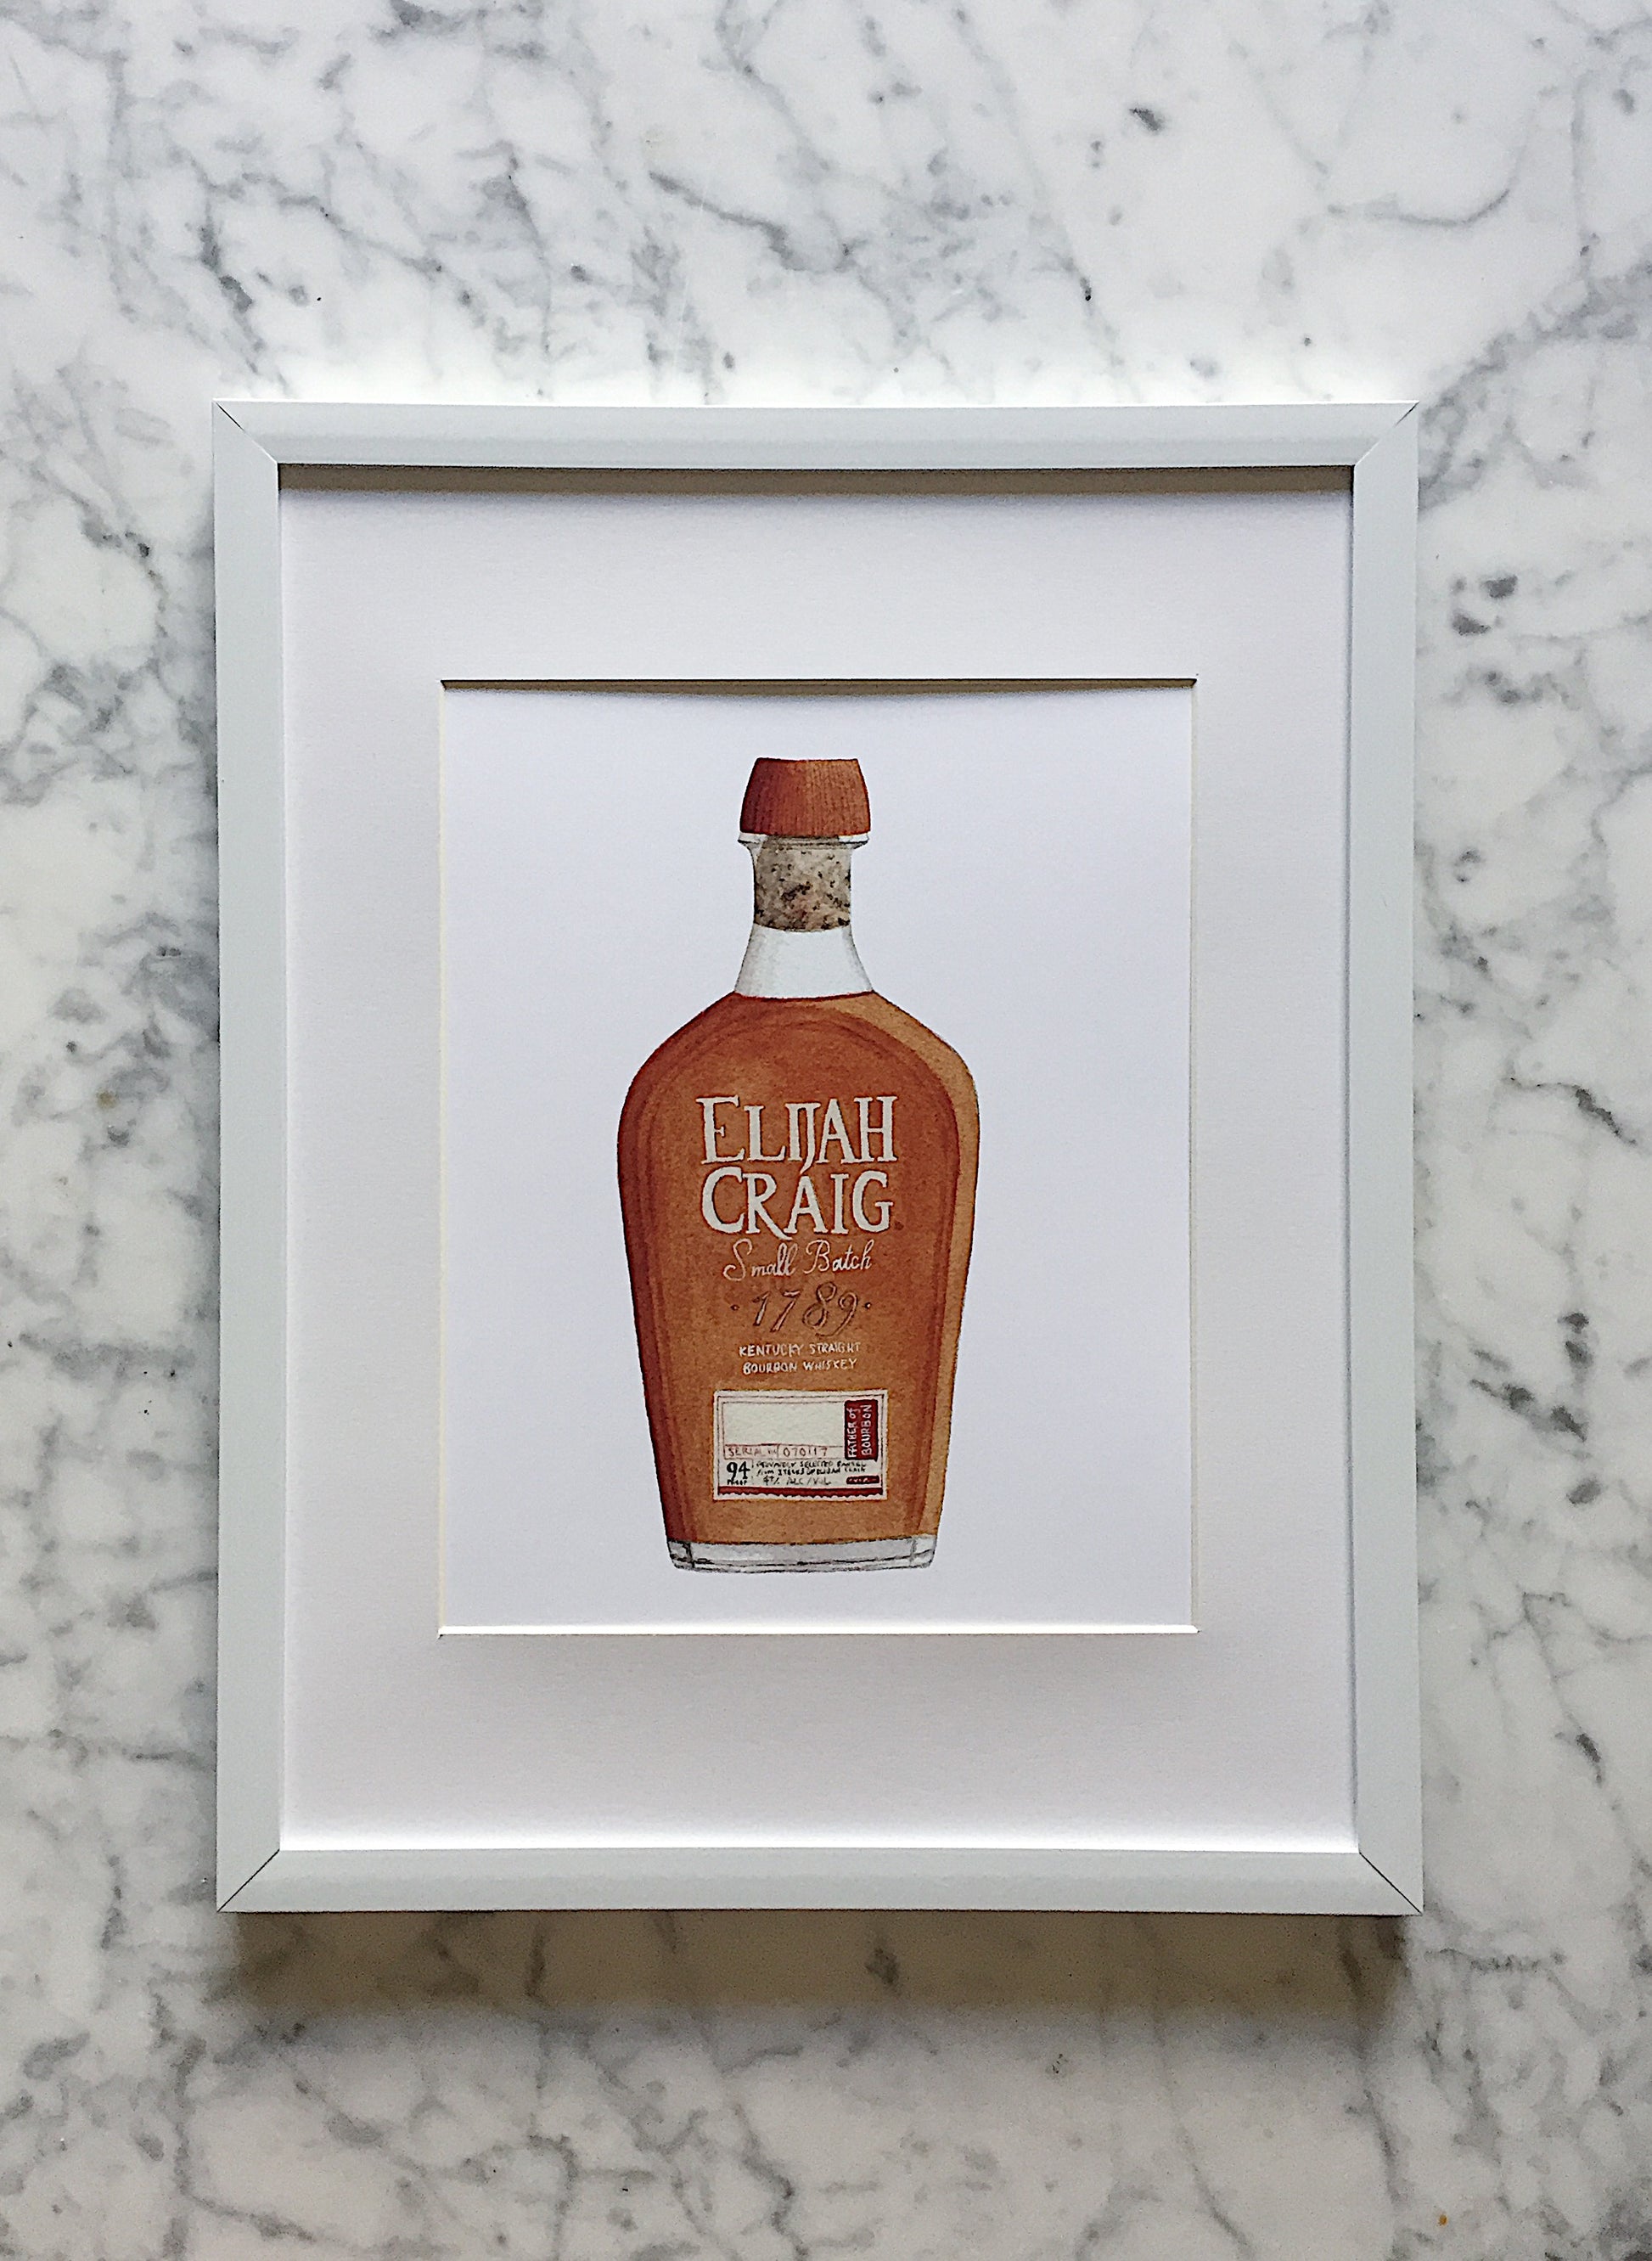 A beautifully detailed watercolor art print of an Elijah Craig bourbon bottle with a crisp white background.